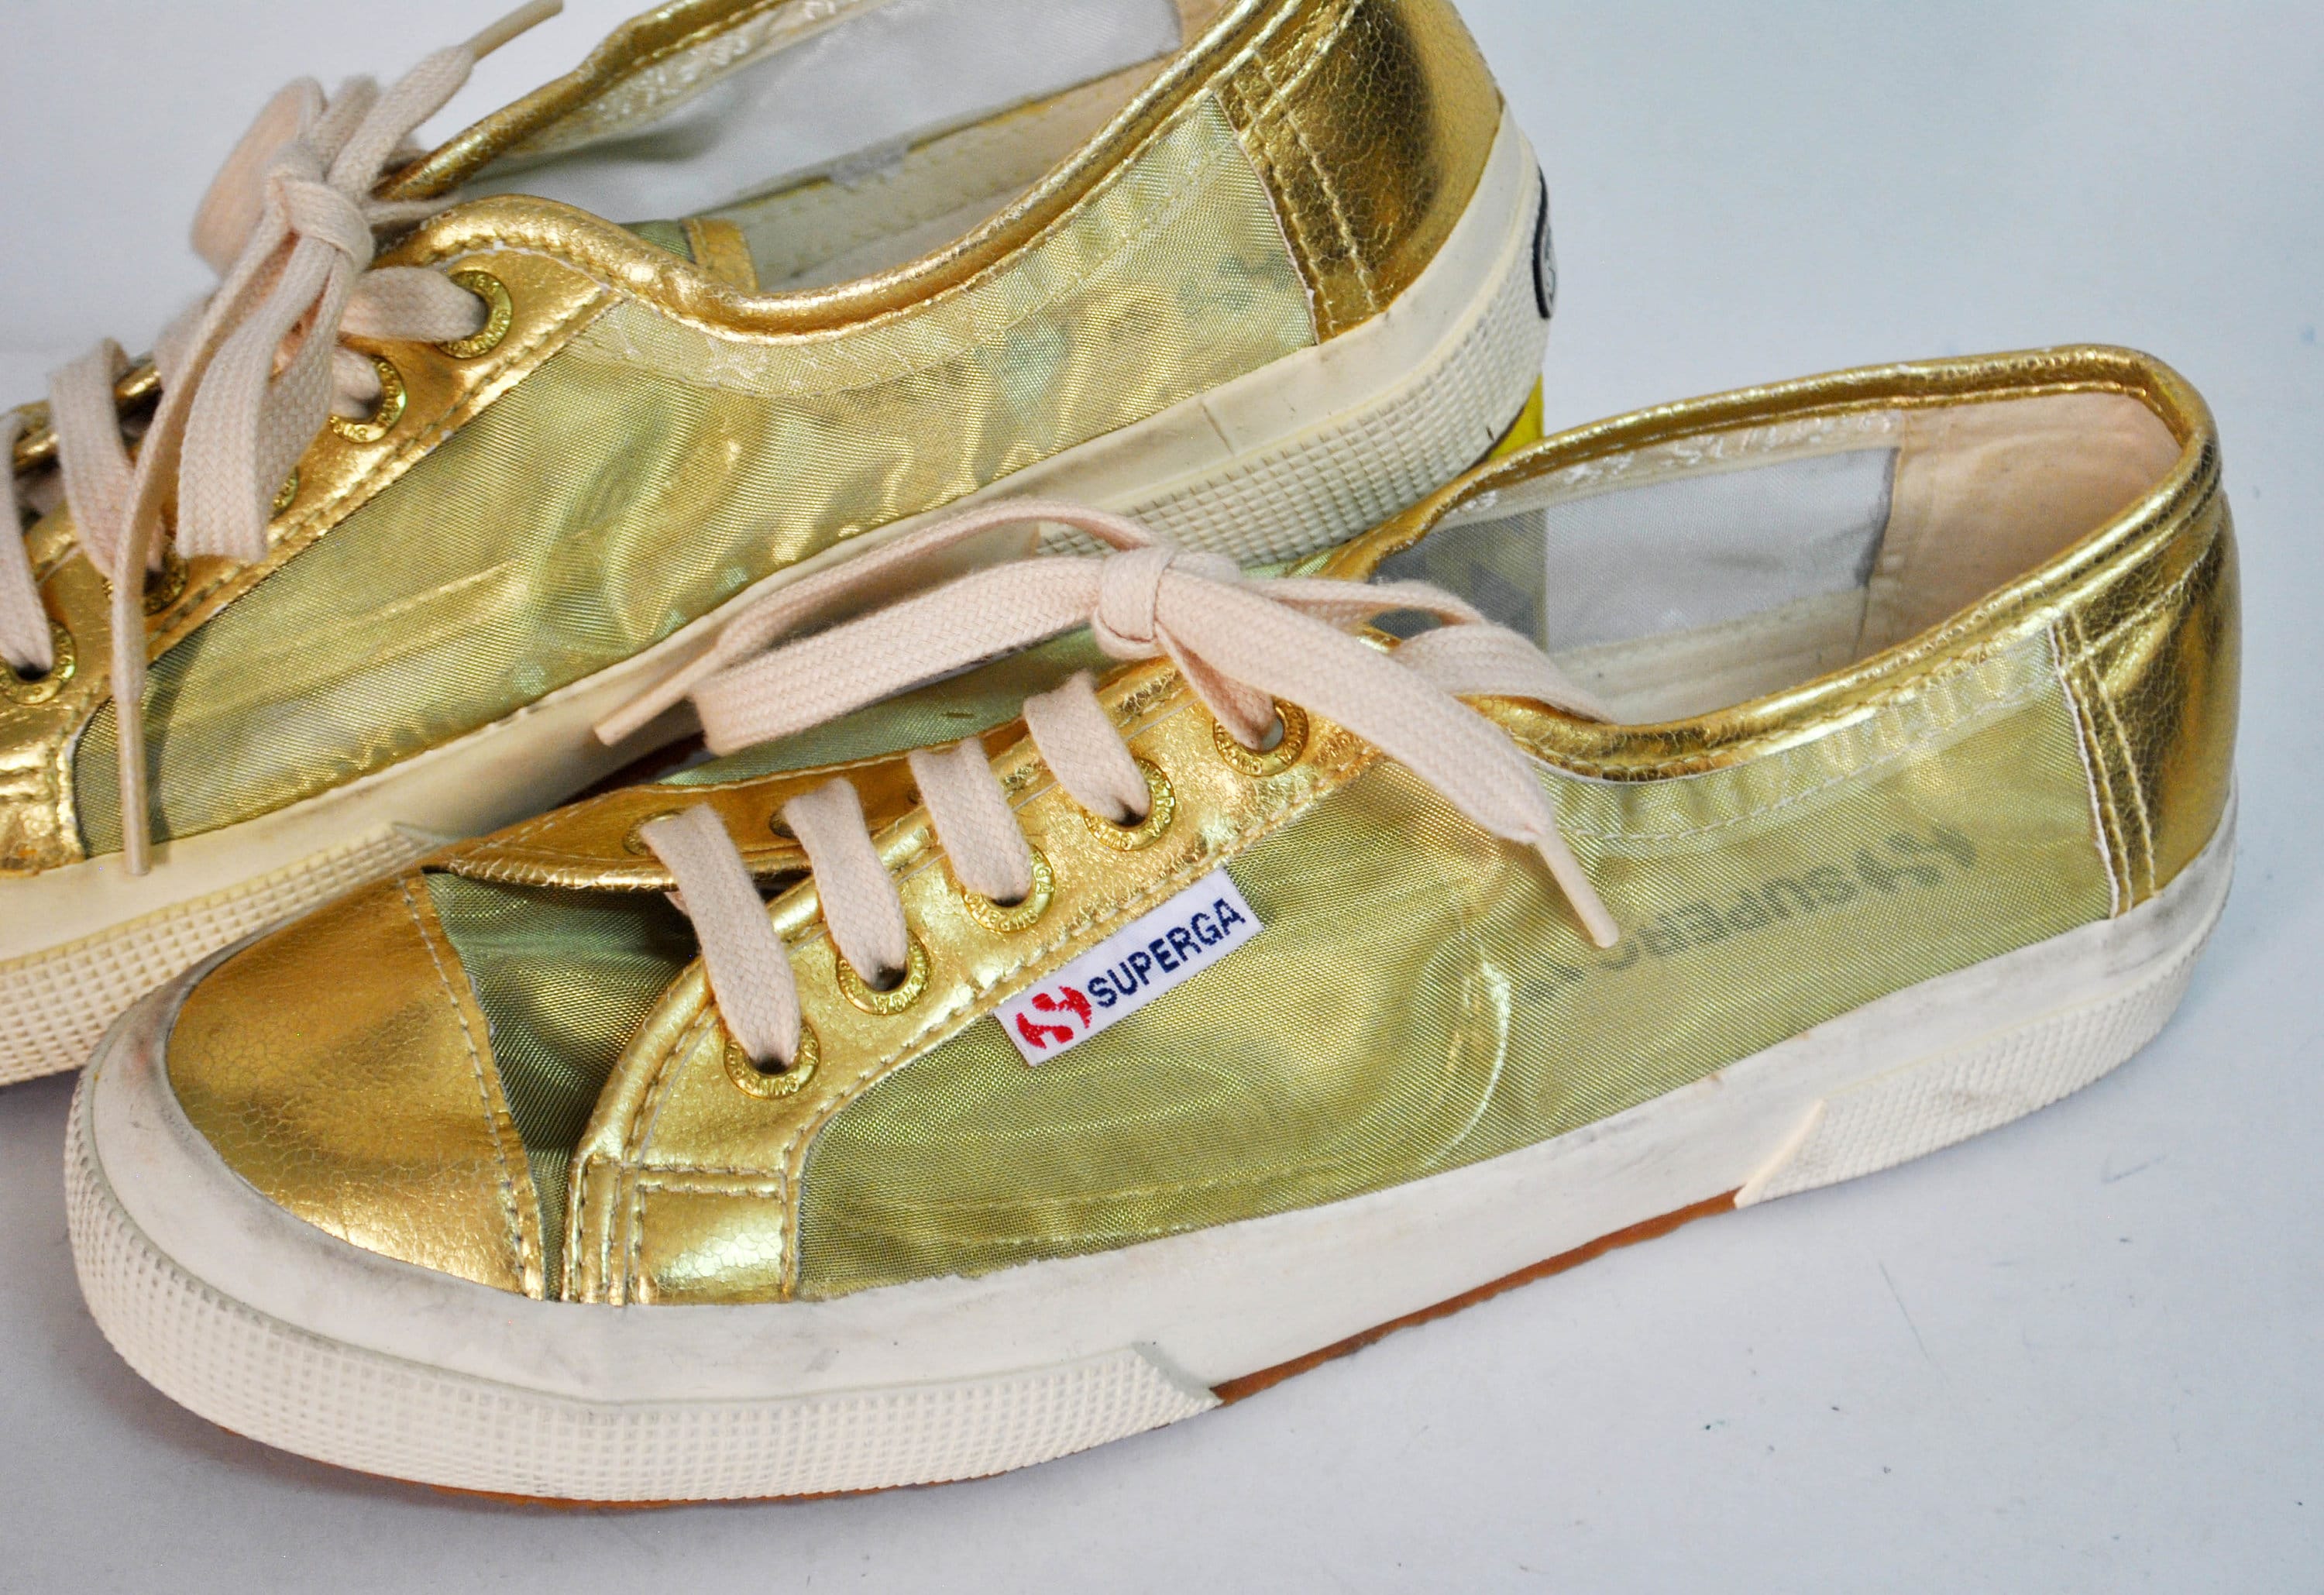 Superga 2750 Rose Gold Sequin Platform Sneakers Size US 7.5 - $27 - From  Cynthia